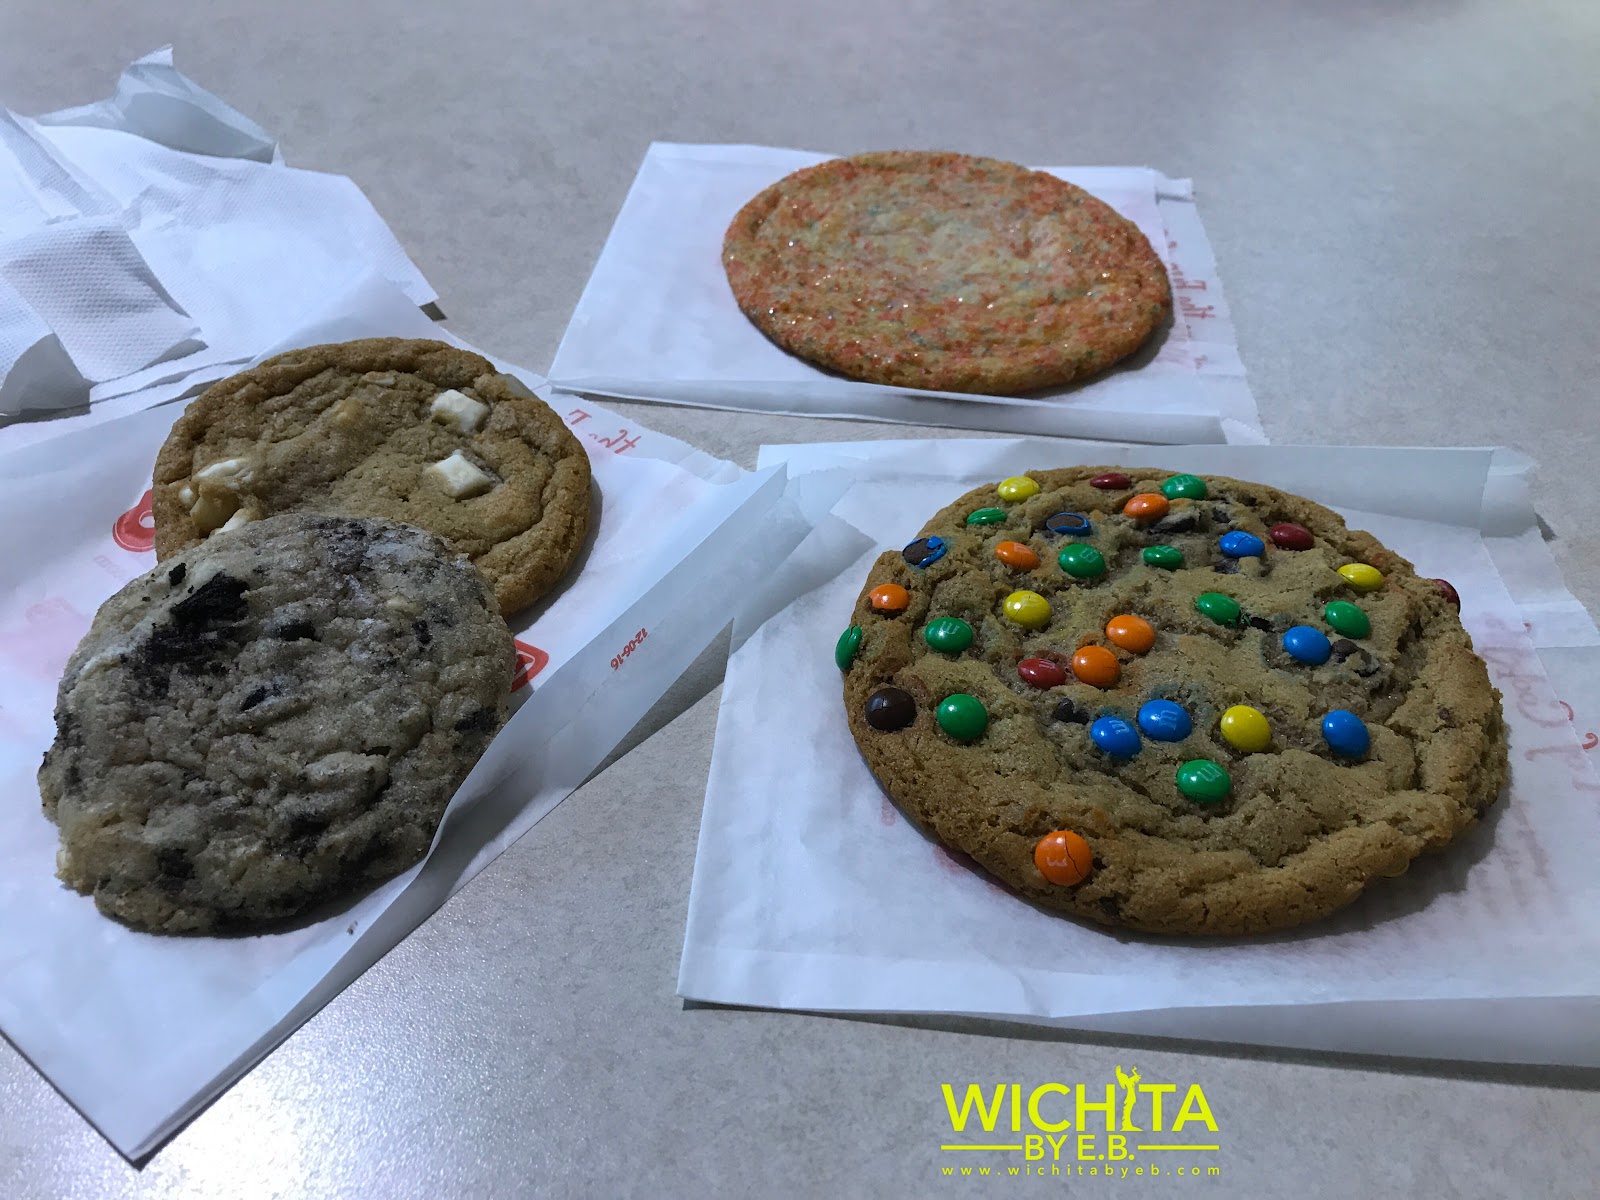 Great American Cookies Review - Wichita By E.B.